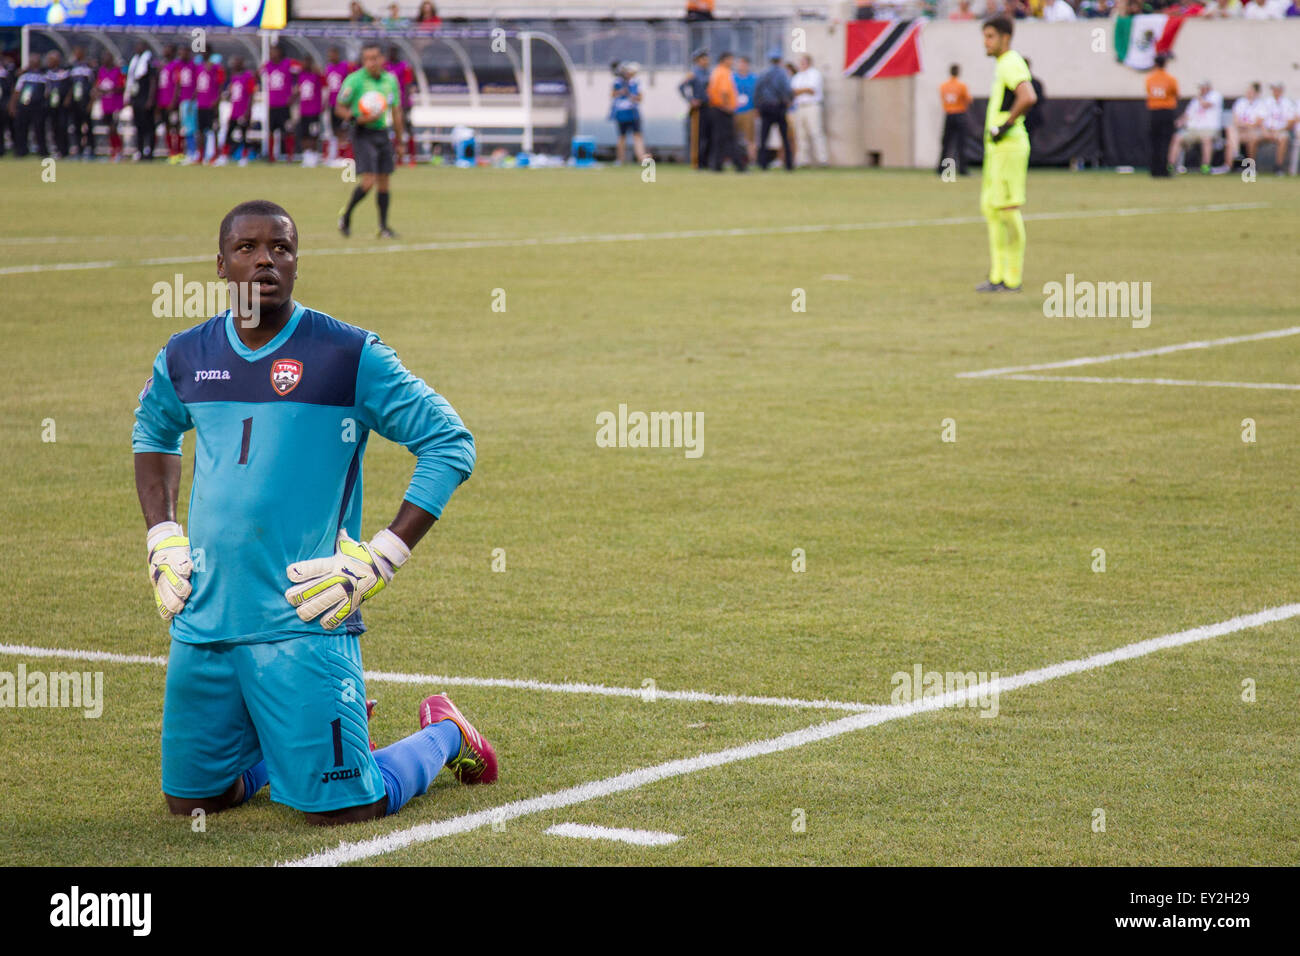 The Match By Shootout. 19th July, 2015. Trinidad & Tobago goalkeeper Marvin Phillip (1) looks away from his waiting spot as Panama goalkeeper Jaime Penedo (1) gets ready for the shootout during the CONCACAF Gold Cup 2015 Quarterfinal match between the Trinidad & Tobago and Panama at MetLife Stadium in East Rutherford, New Jersey. Panama won the match by shootout. (Christopher Szagola/Cal Sport Media) © csm/Alamy Live News Stock Photo